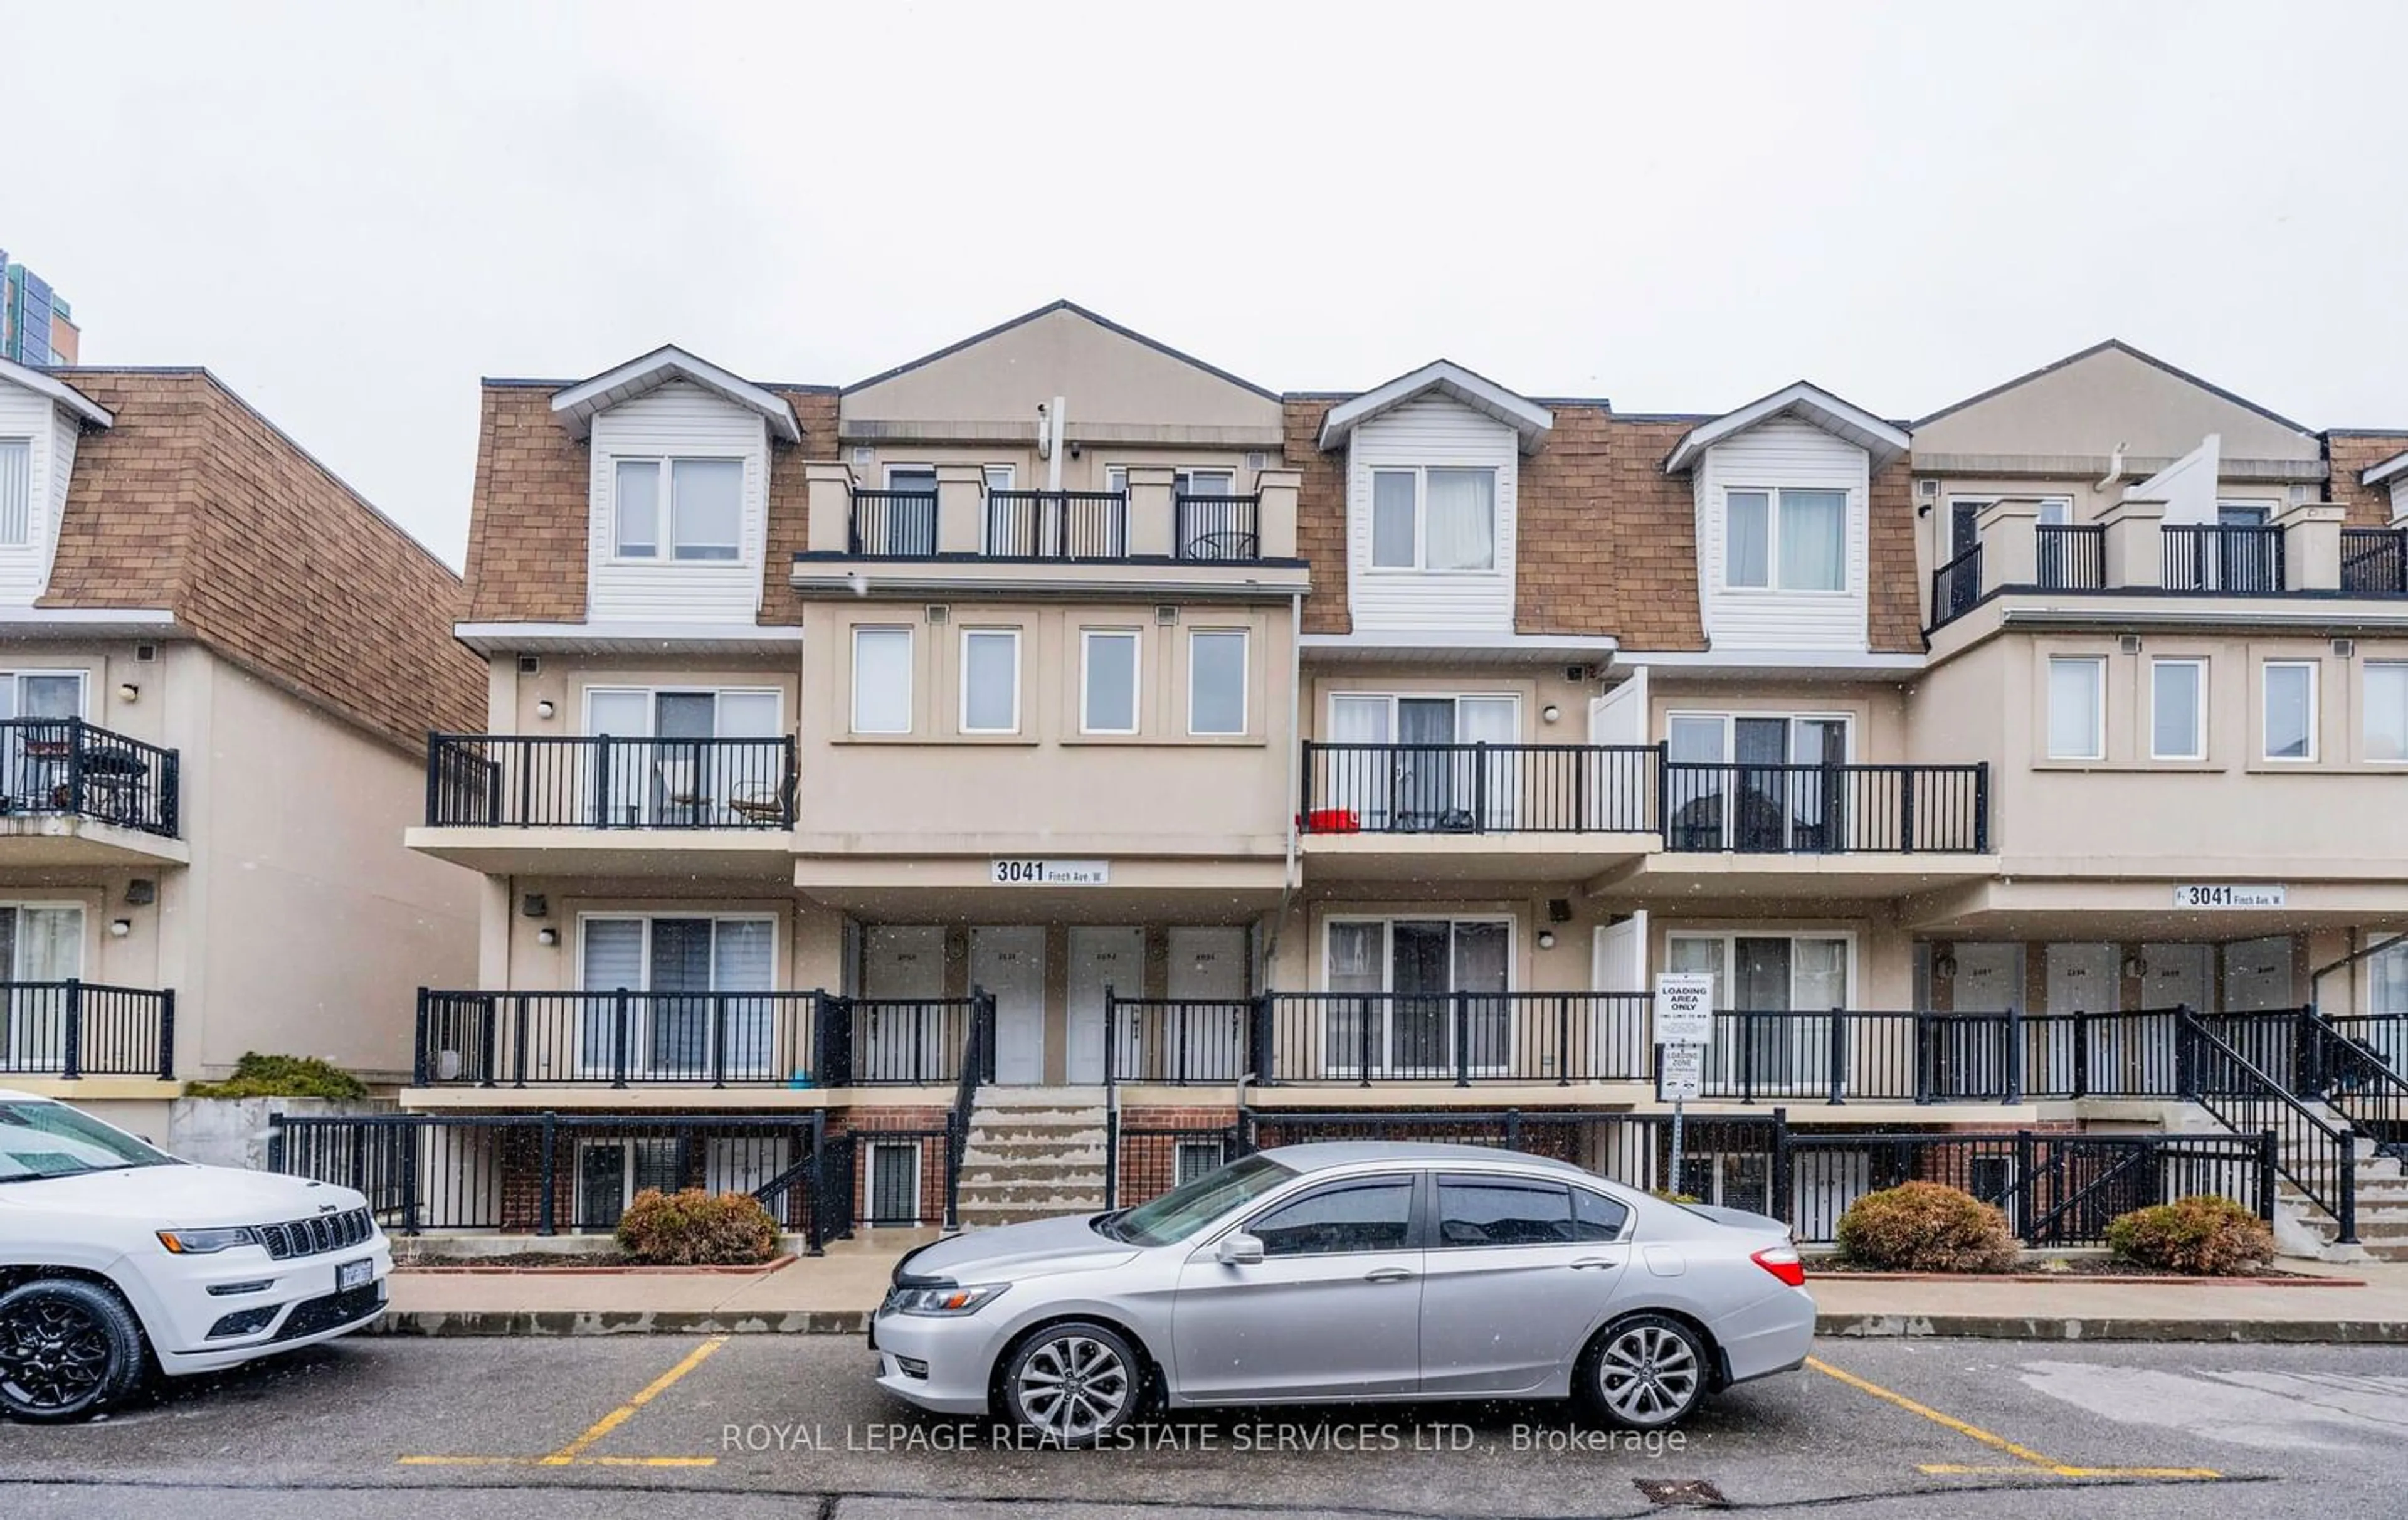 A pic from exterior of the house or condo for 3041 Finch Ave #2054, Toronto Ontario M9M 0A4